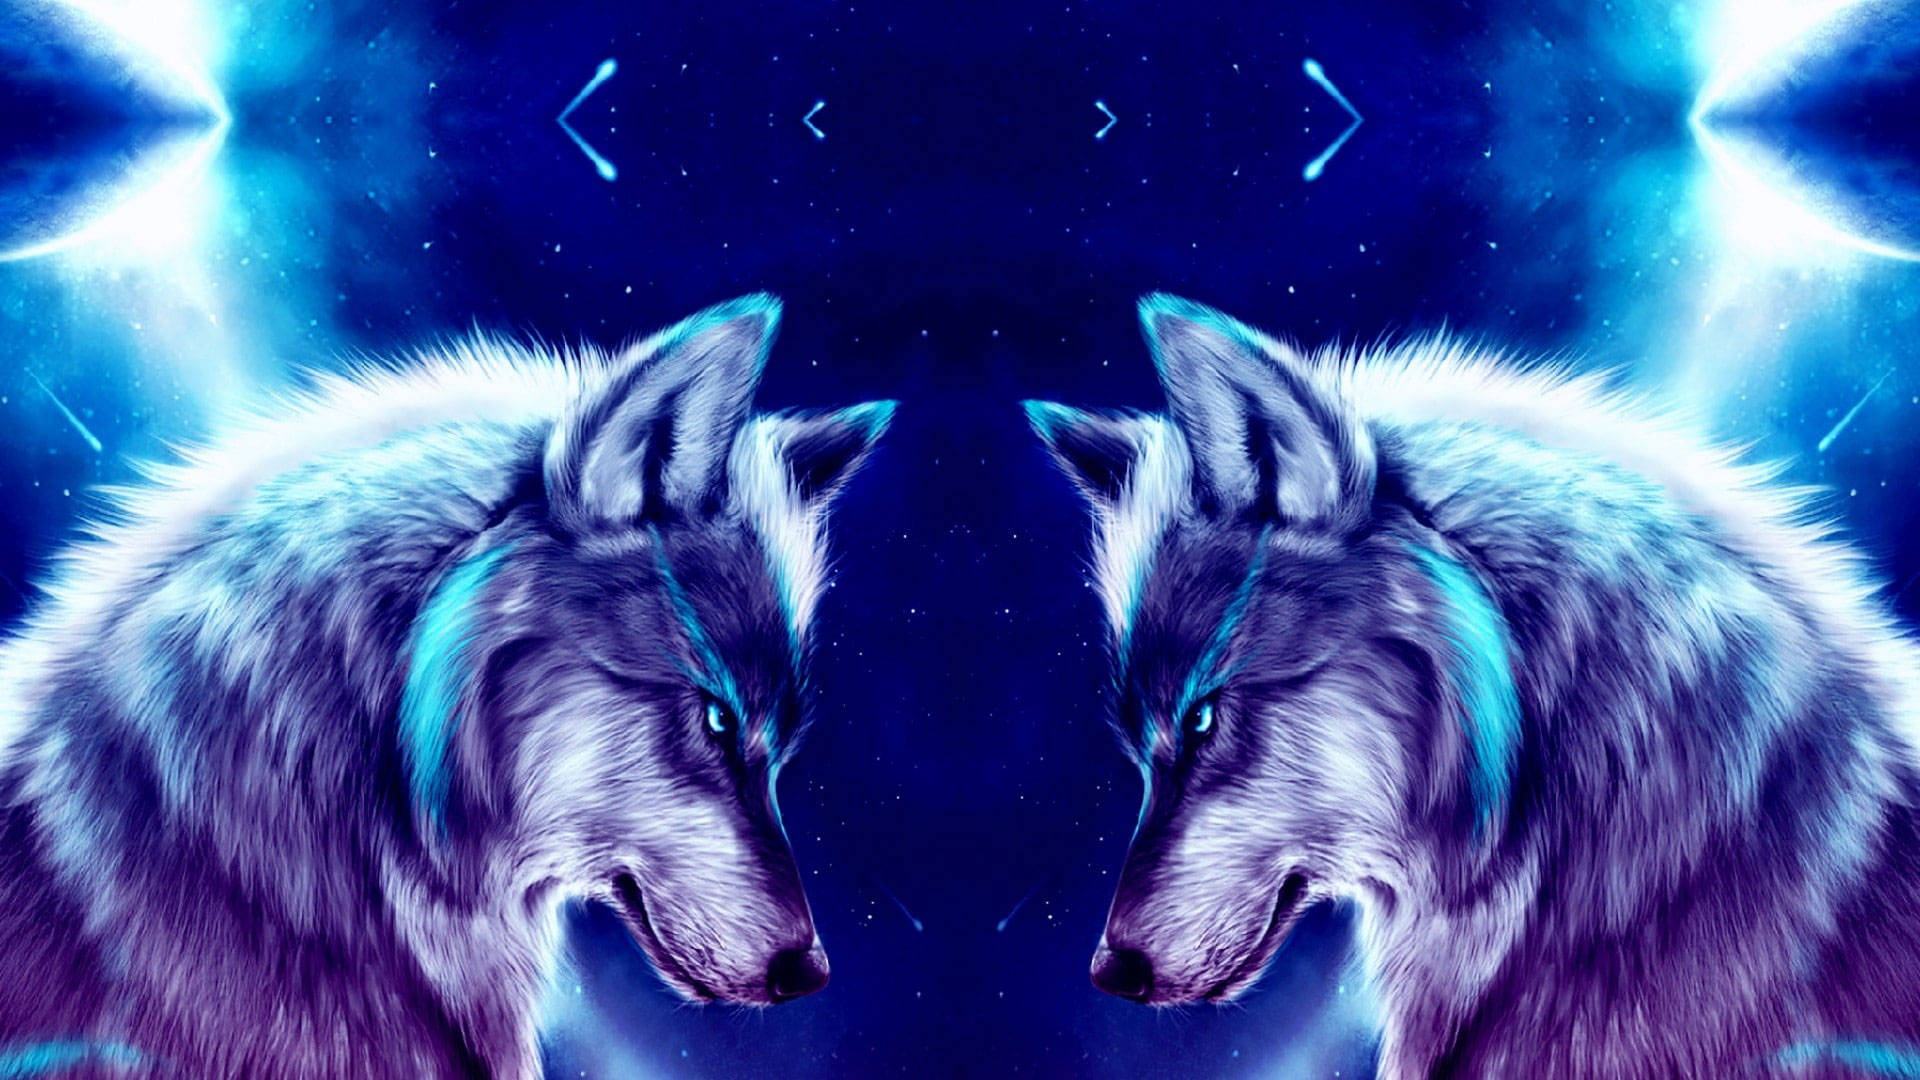 Cool Galaxy Wolf - Two Wolves Gazing At The Stars Background